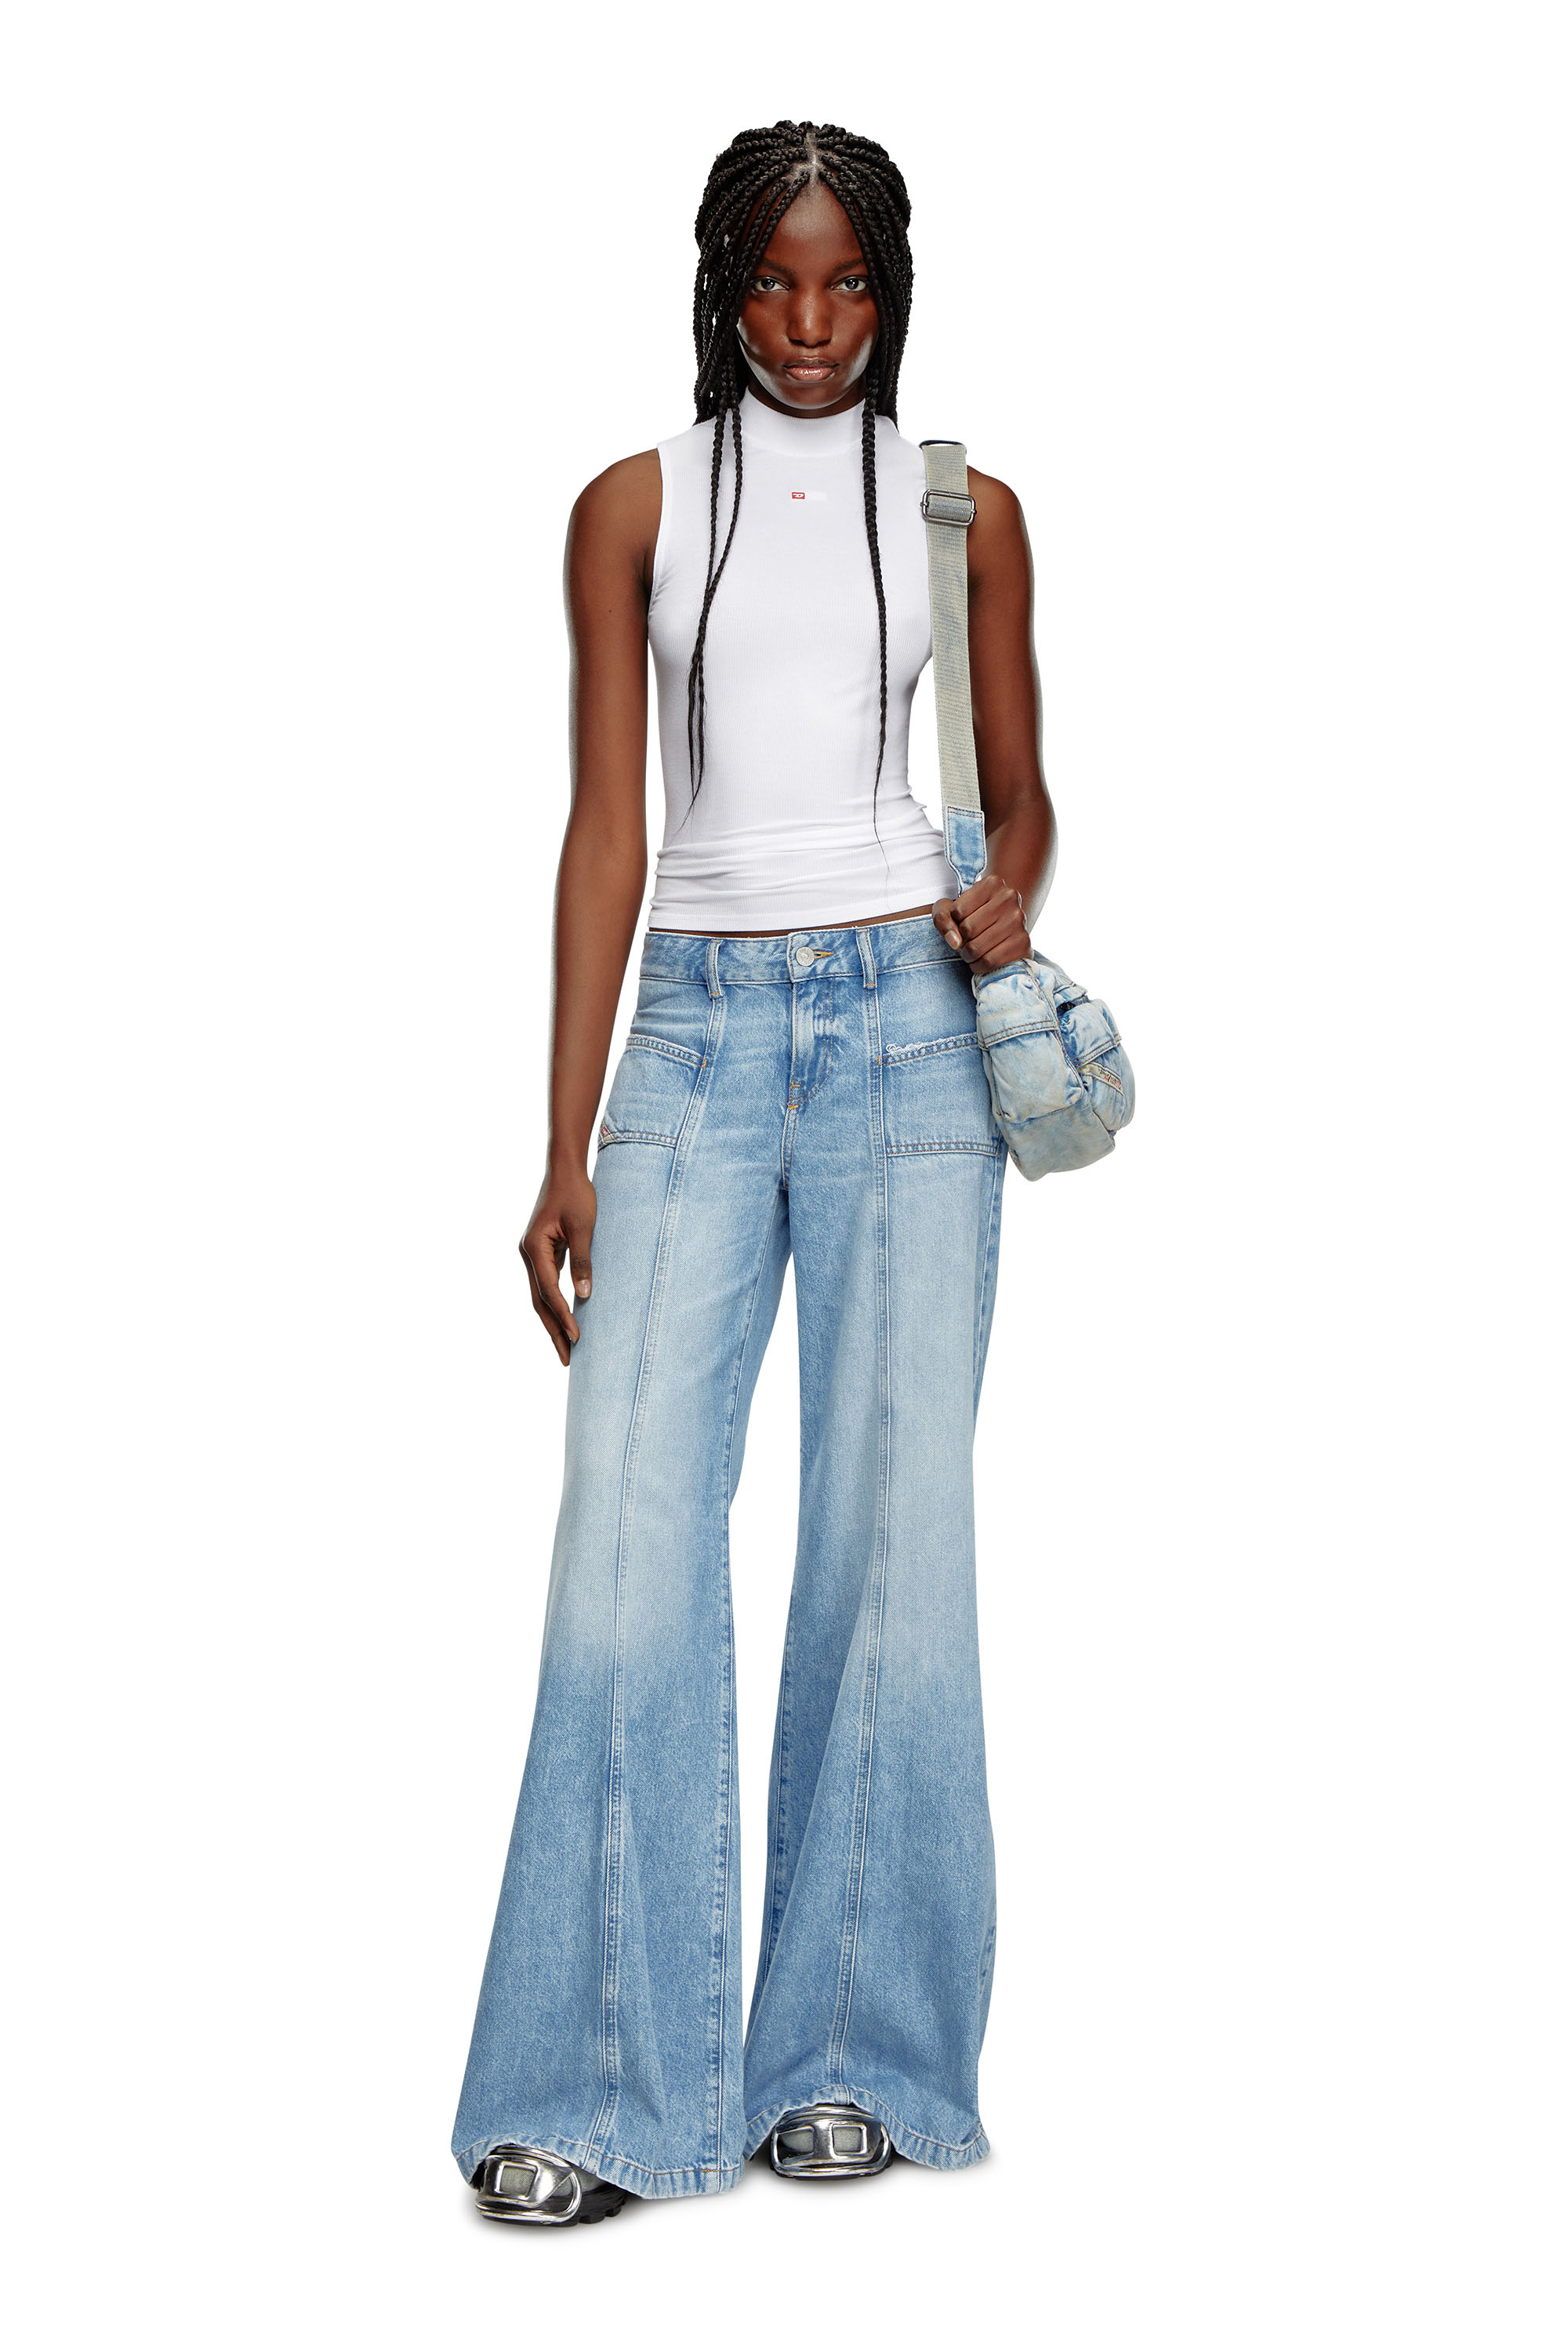 Diesel - Bootcut and Flare Jeans D-Akii 09J88, Mujer Bootcut y Flare Jeans - D-Akii in Azul marino - Image 1